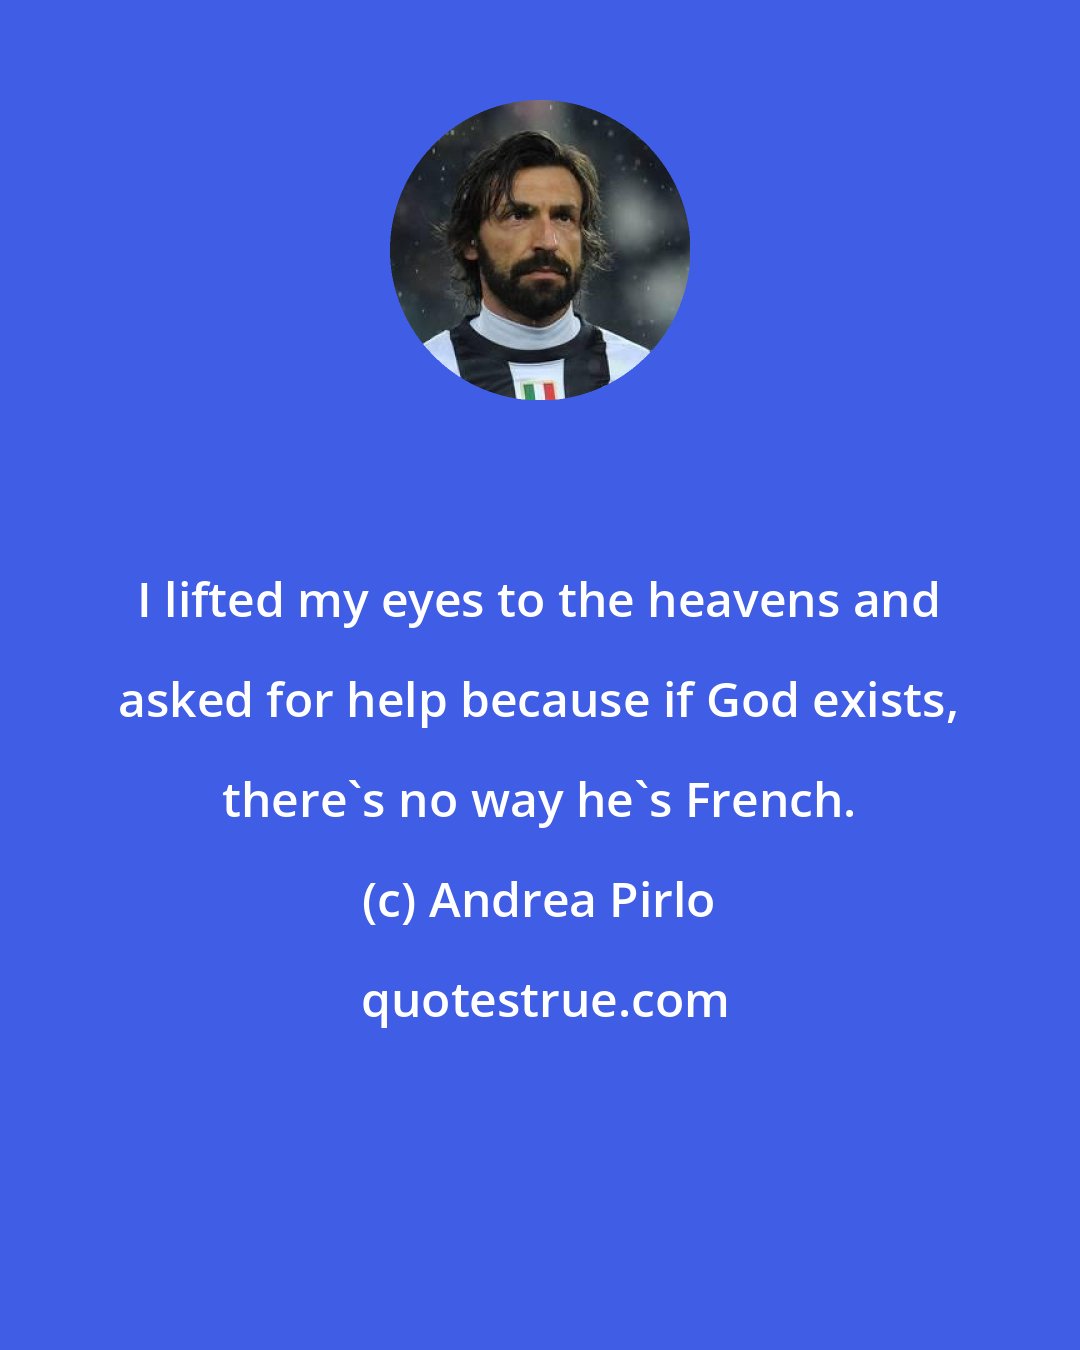 Andrea Pirlo: I lifted my eyes to the heavens and asked for help because if God exists, there's no way he's French.